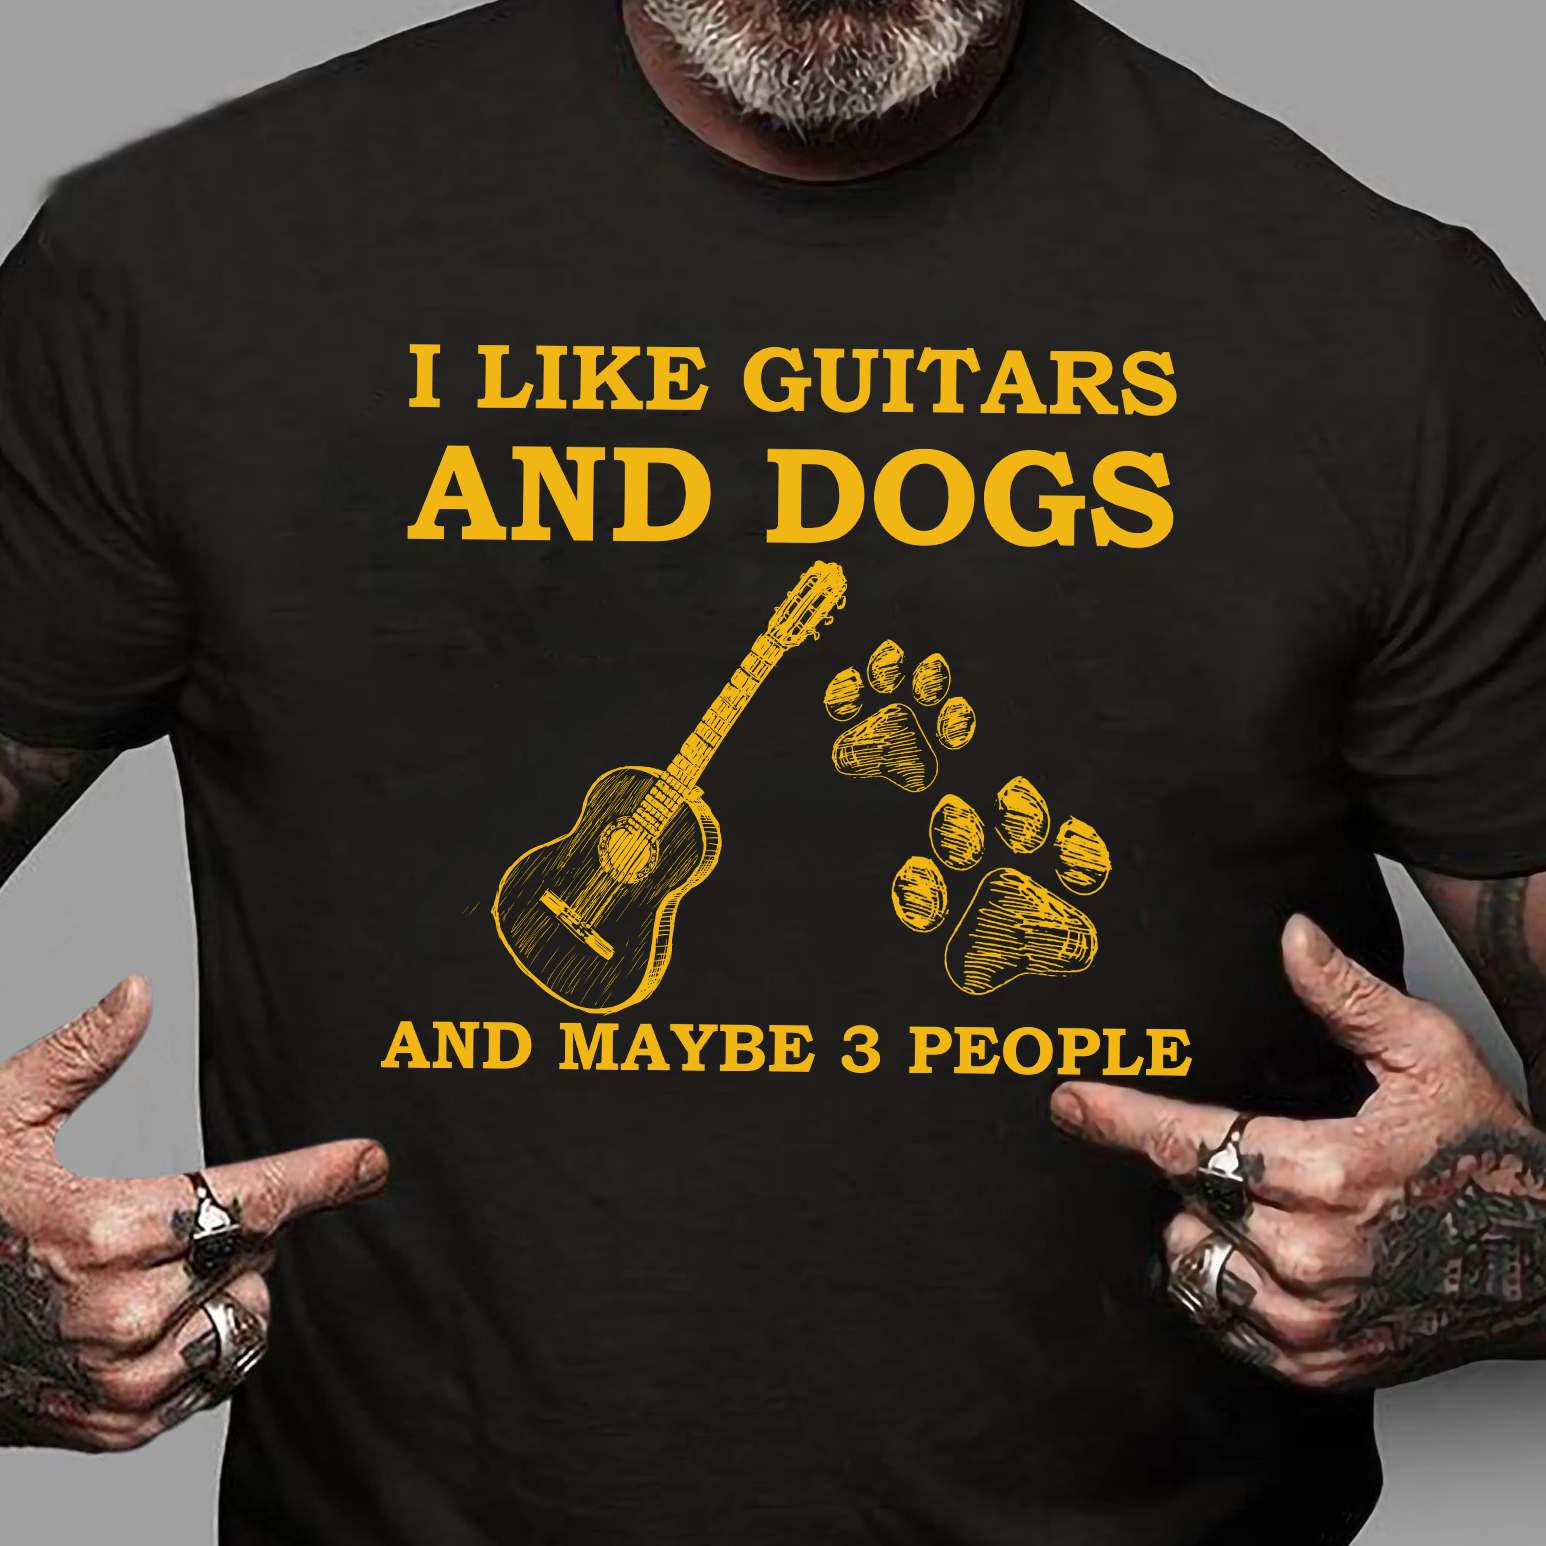 I like guitars and dogs and maybe 3 people